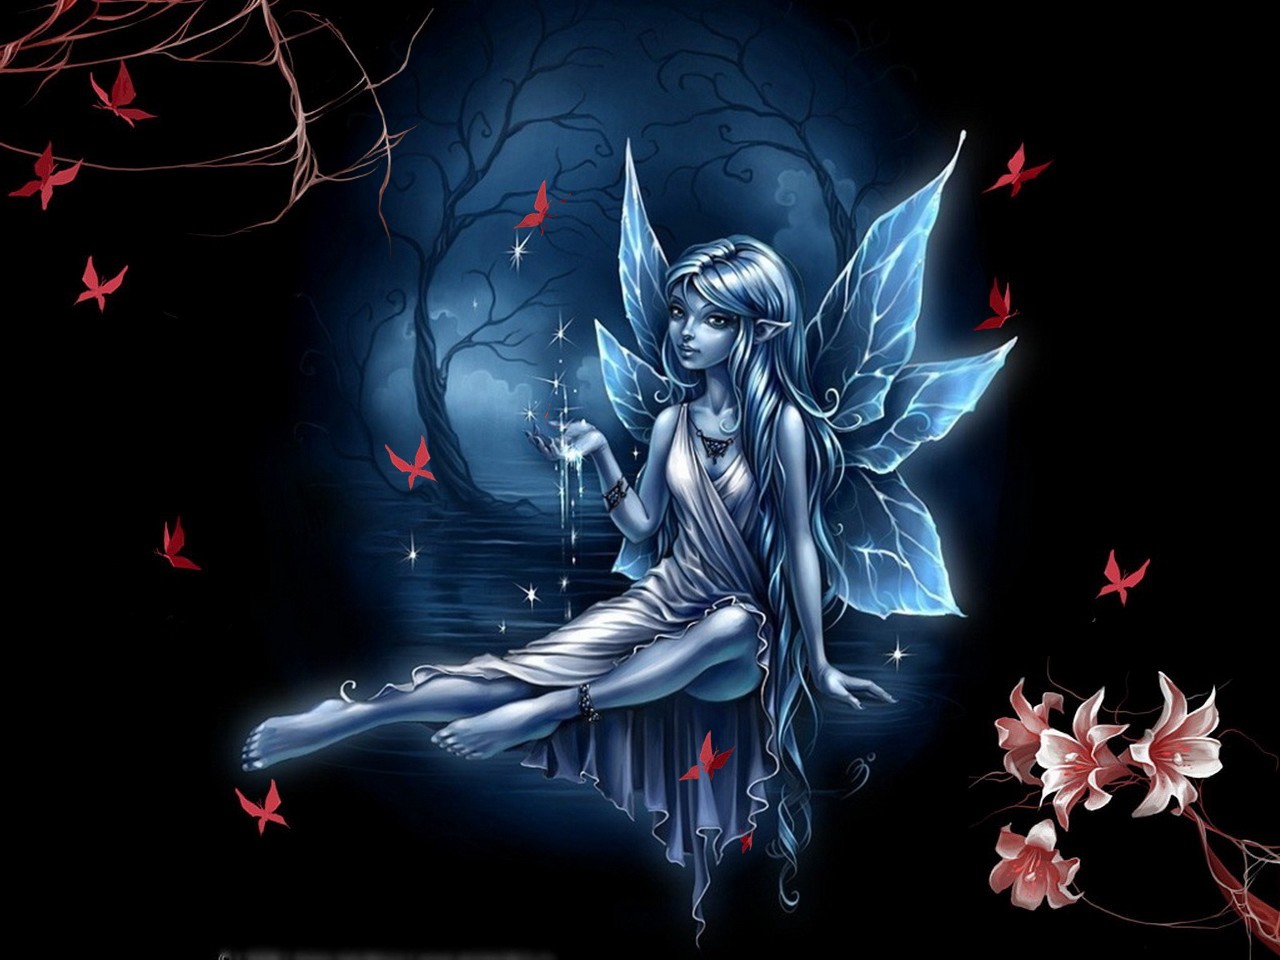 Fairy HD Wallpapers Fairy HD Wallpapers Check out the cool latest